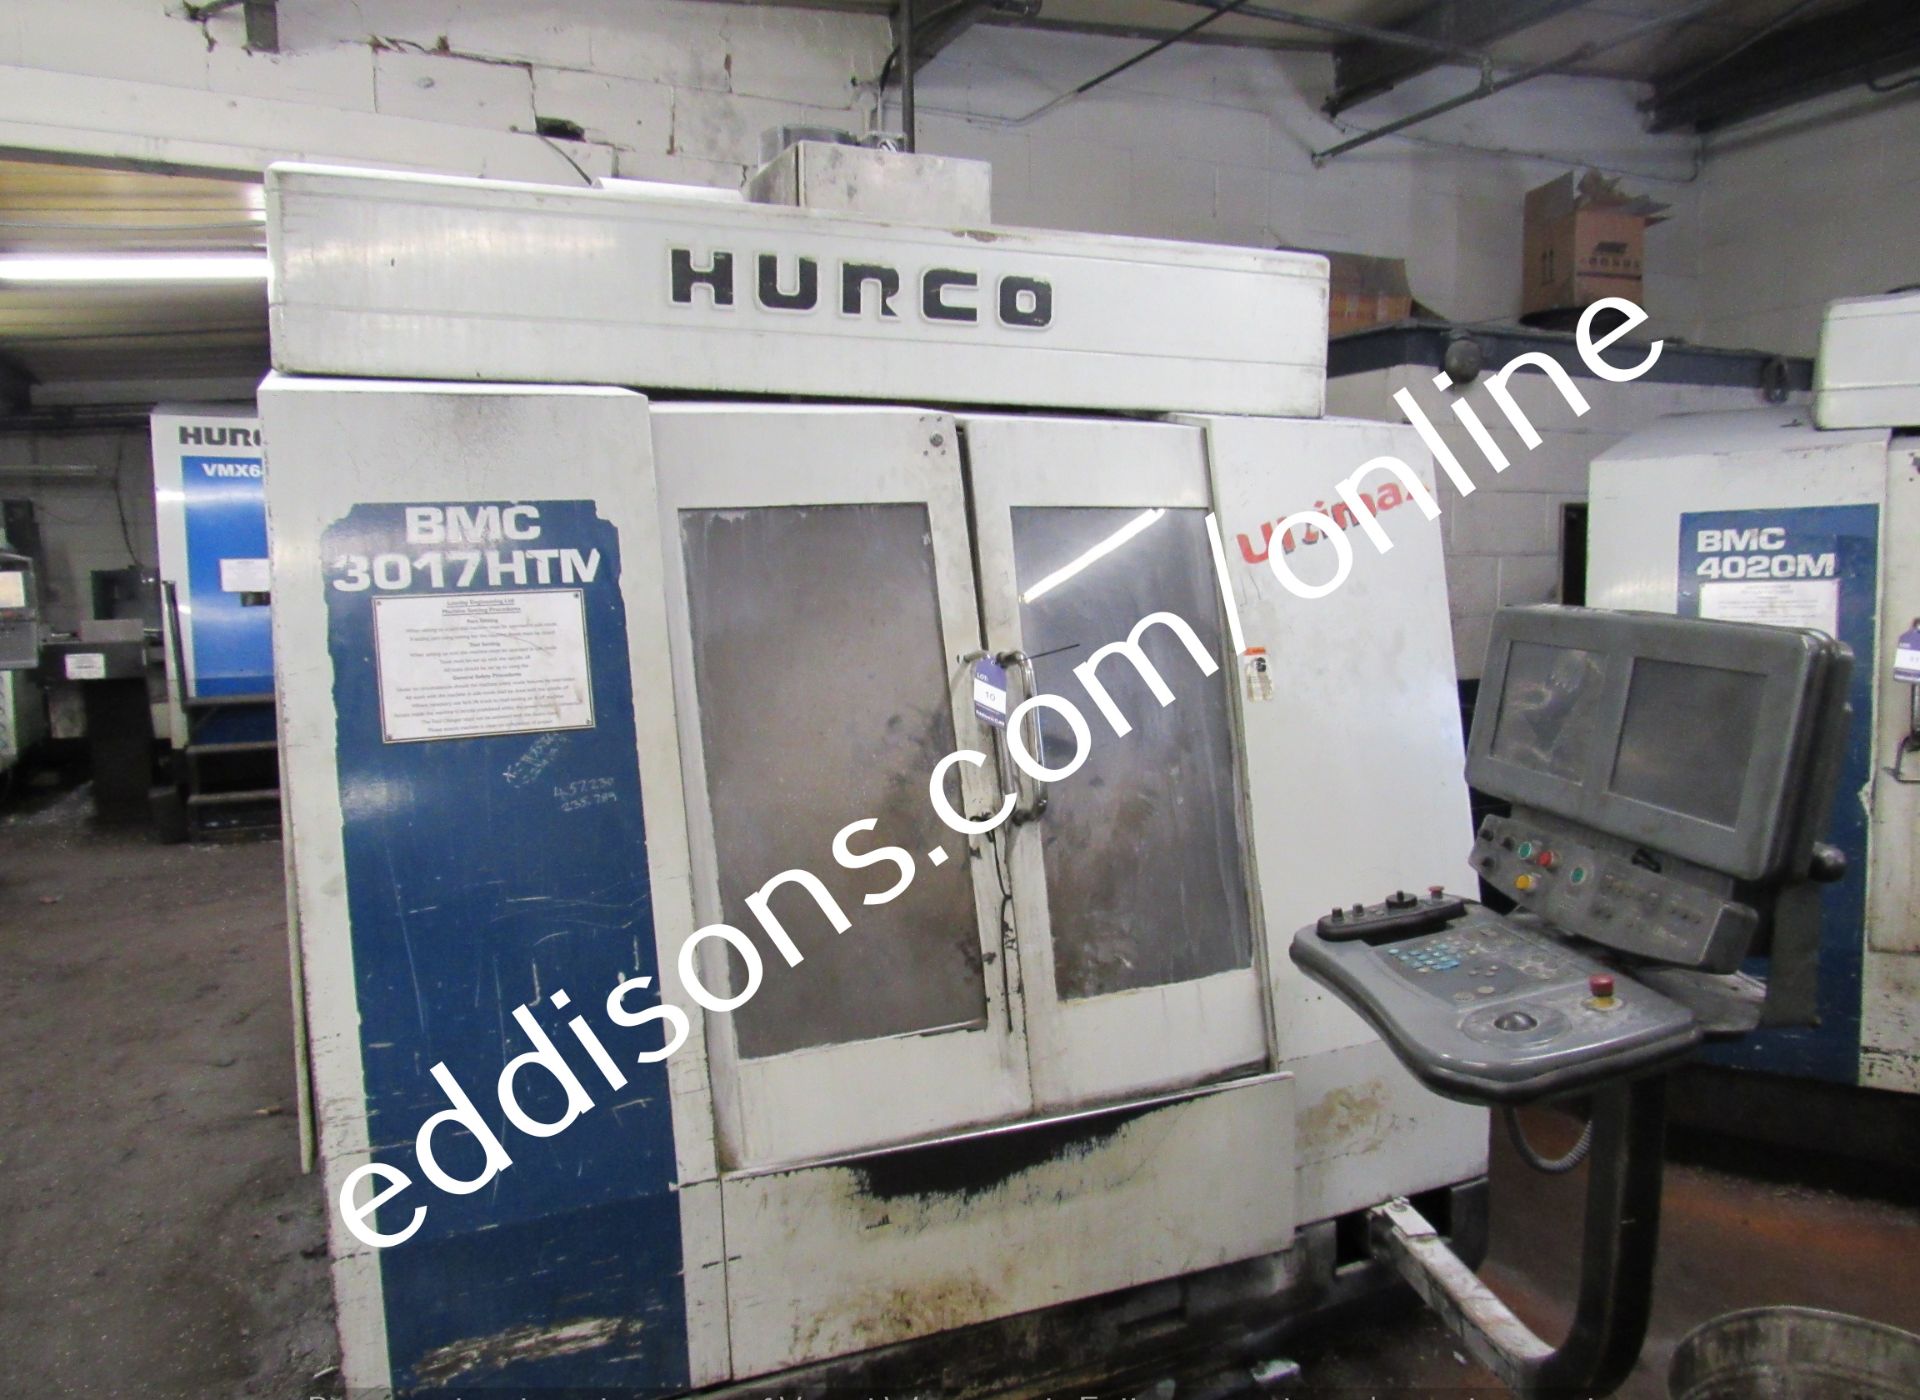 Hurco Ultimax BMC 3017HTM (762mm x 460mm bed limit - Image 2 of 11